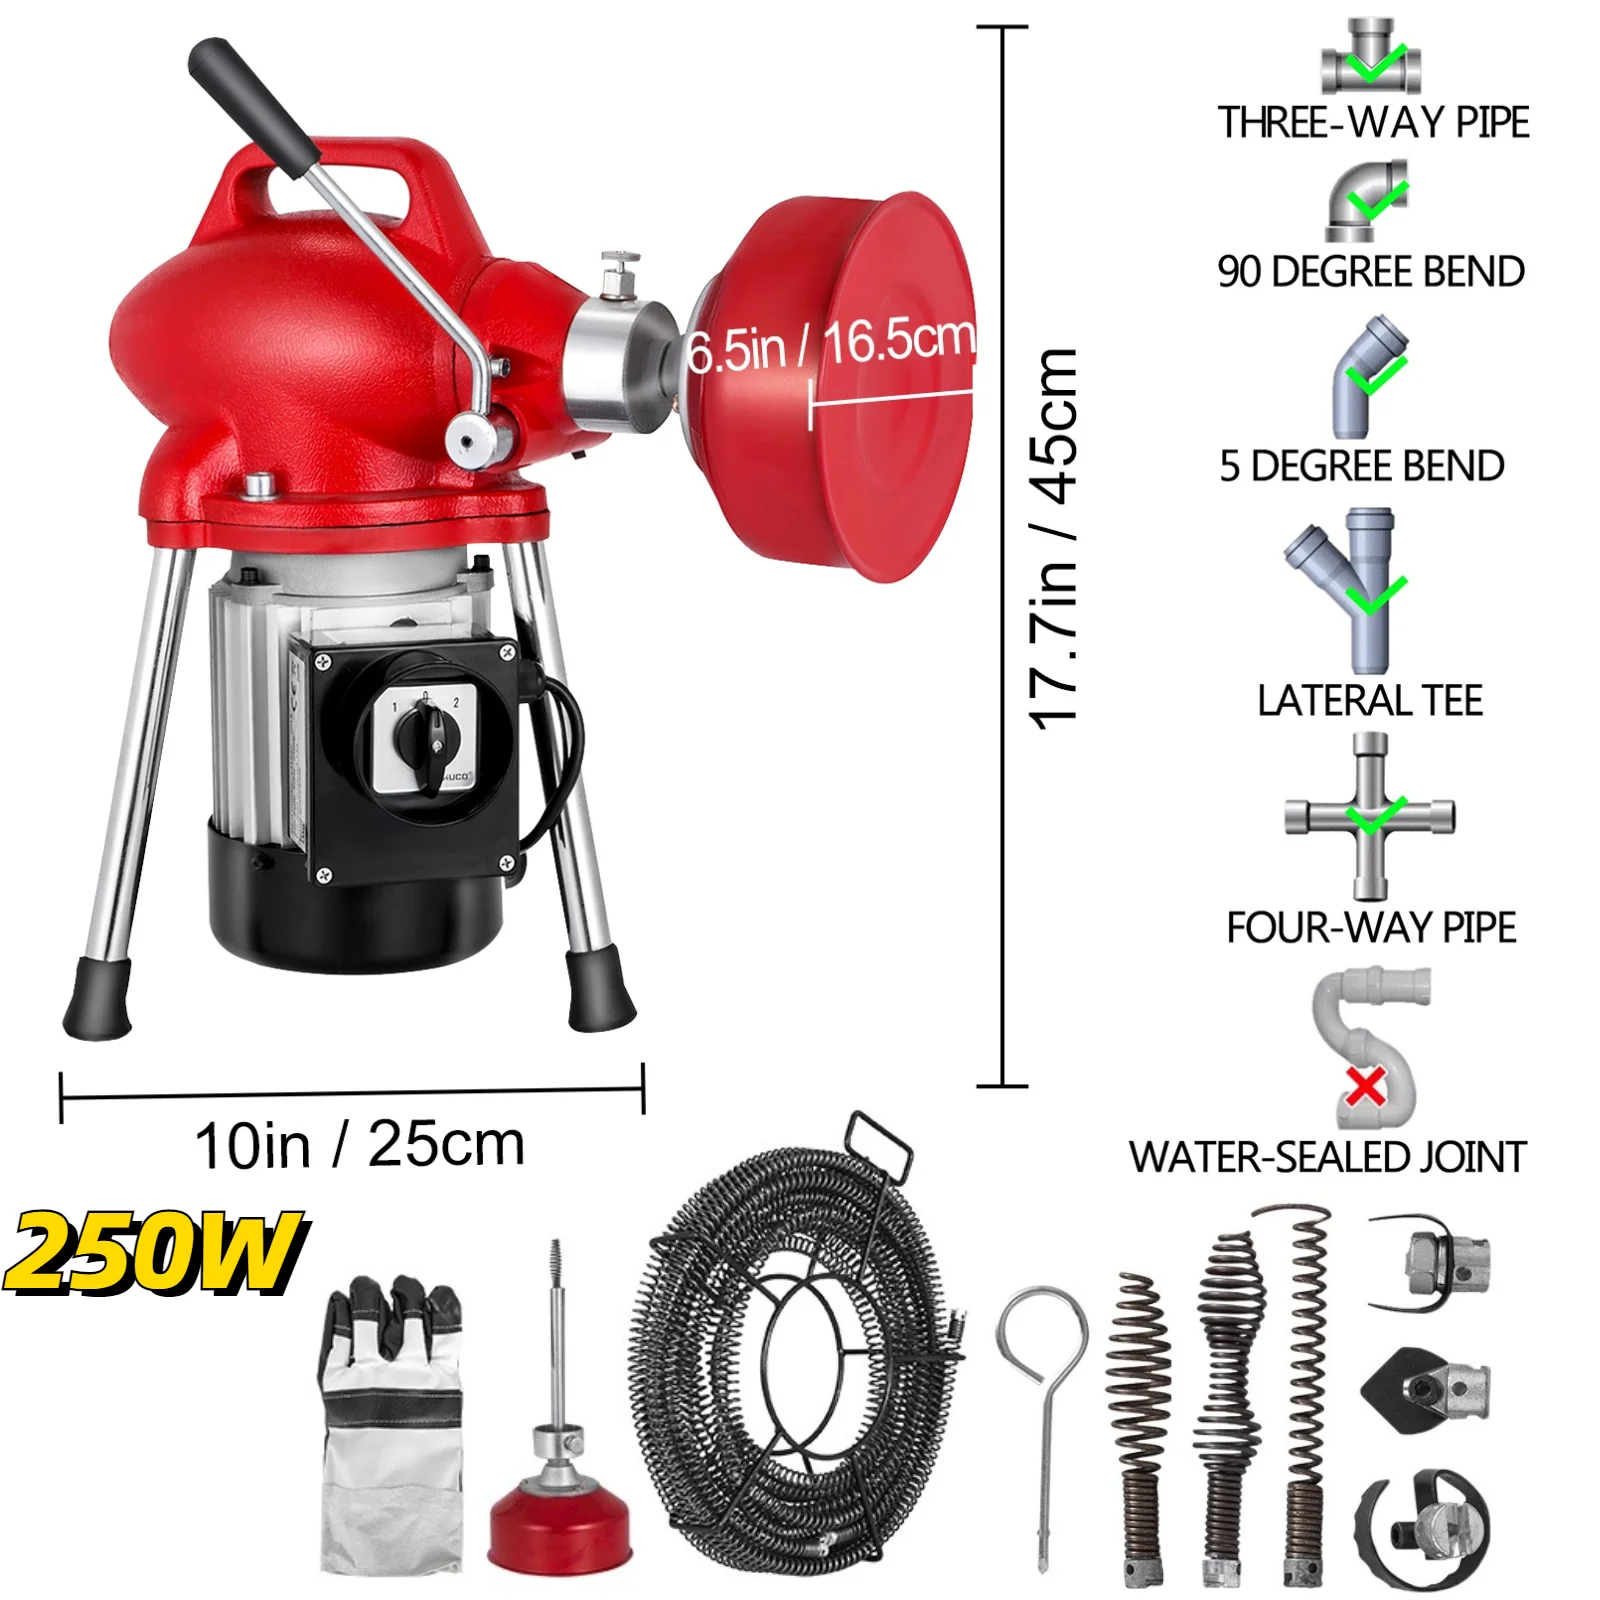 https://ae01.alicdn.com/kf/Sd25305768dc64cb0b2e33efc35d08069X/VEVOR-Auger-Pipe-Drain-Cleaning-Machine-250W-400W-500W-Electric-Drain-Cleaner-20-125MM-Tube-Unblocker.png